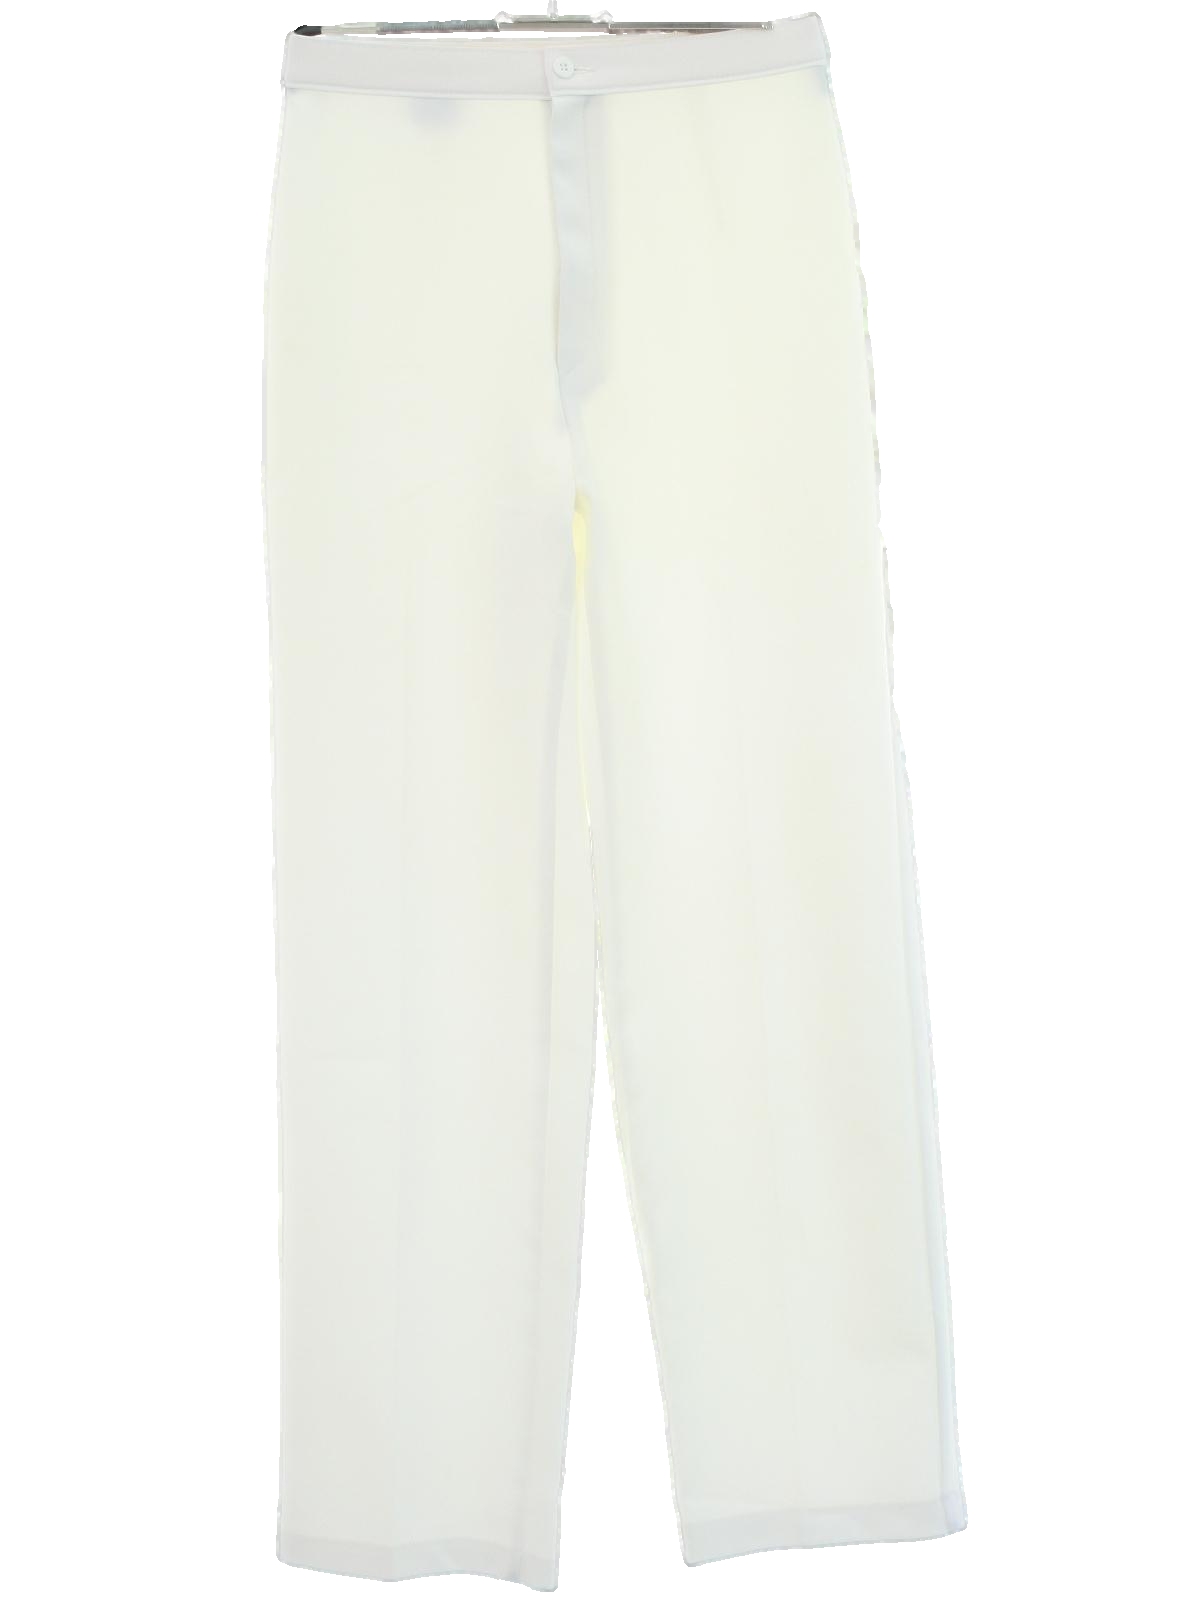 1980's Pants (Levis Bend Overs): 80s -Levis Bend Overs- Womens white  background polyester flat front, slightly tapered leg, high waisted knit  pants with button and zippered front closure, no pockets and no